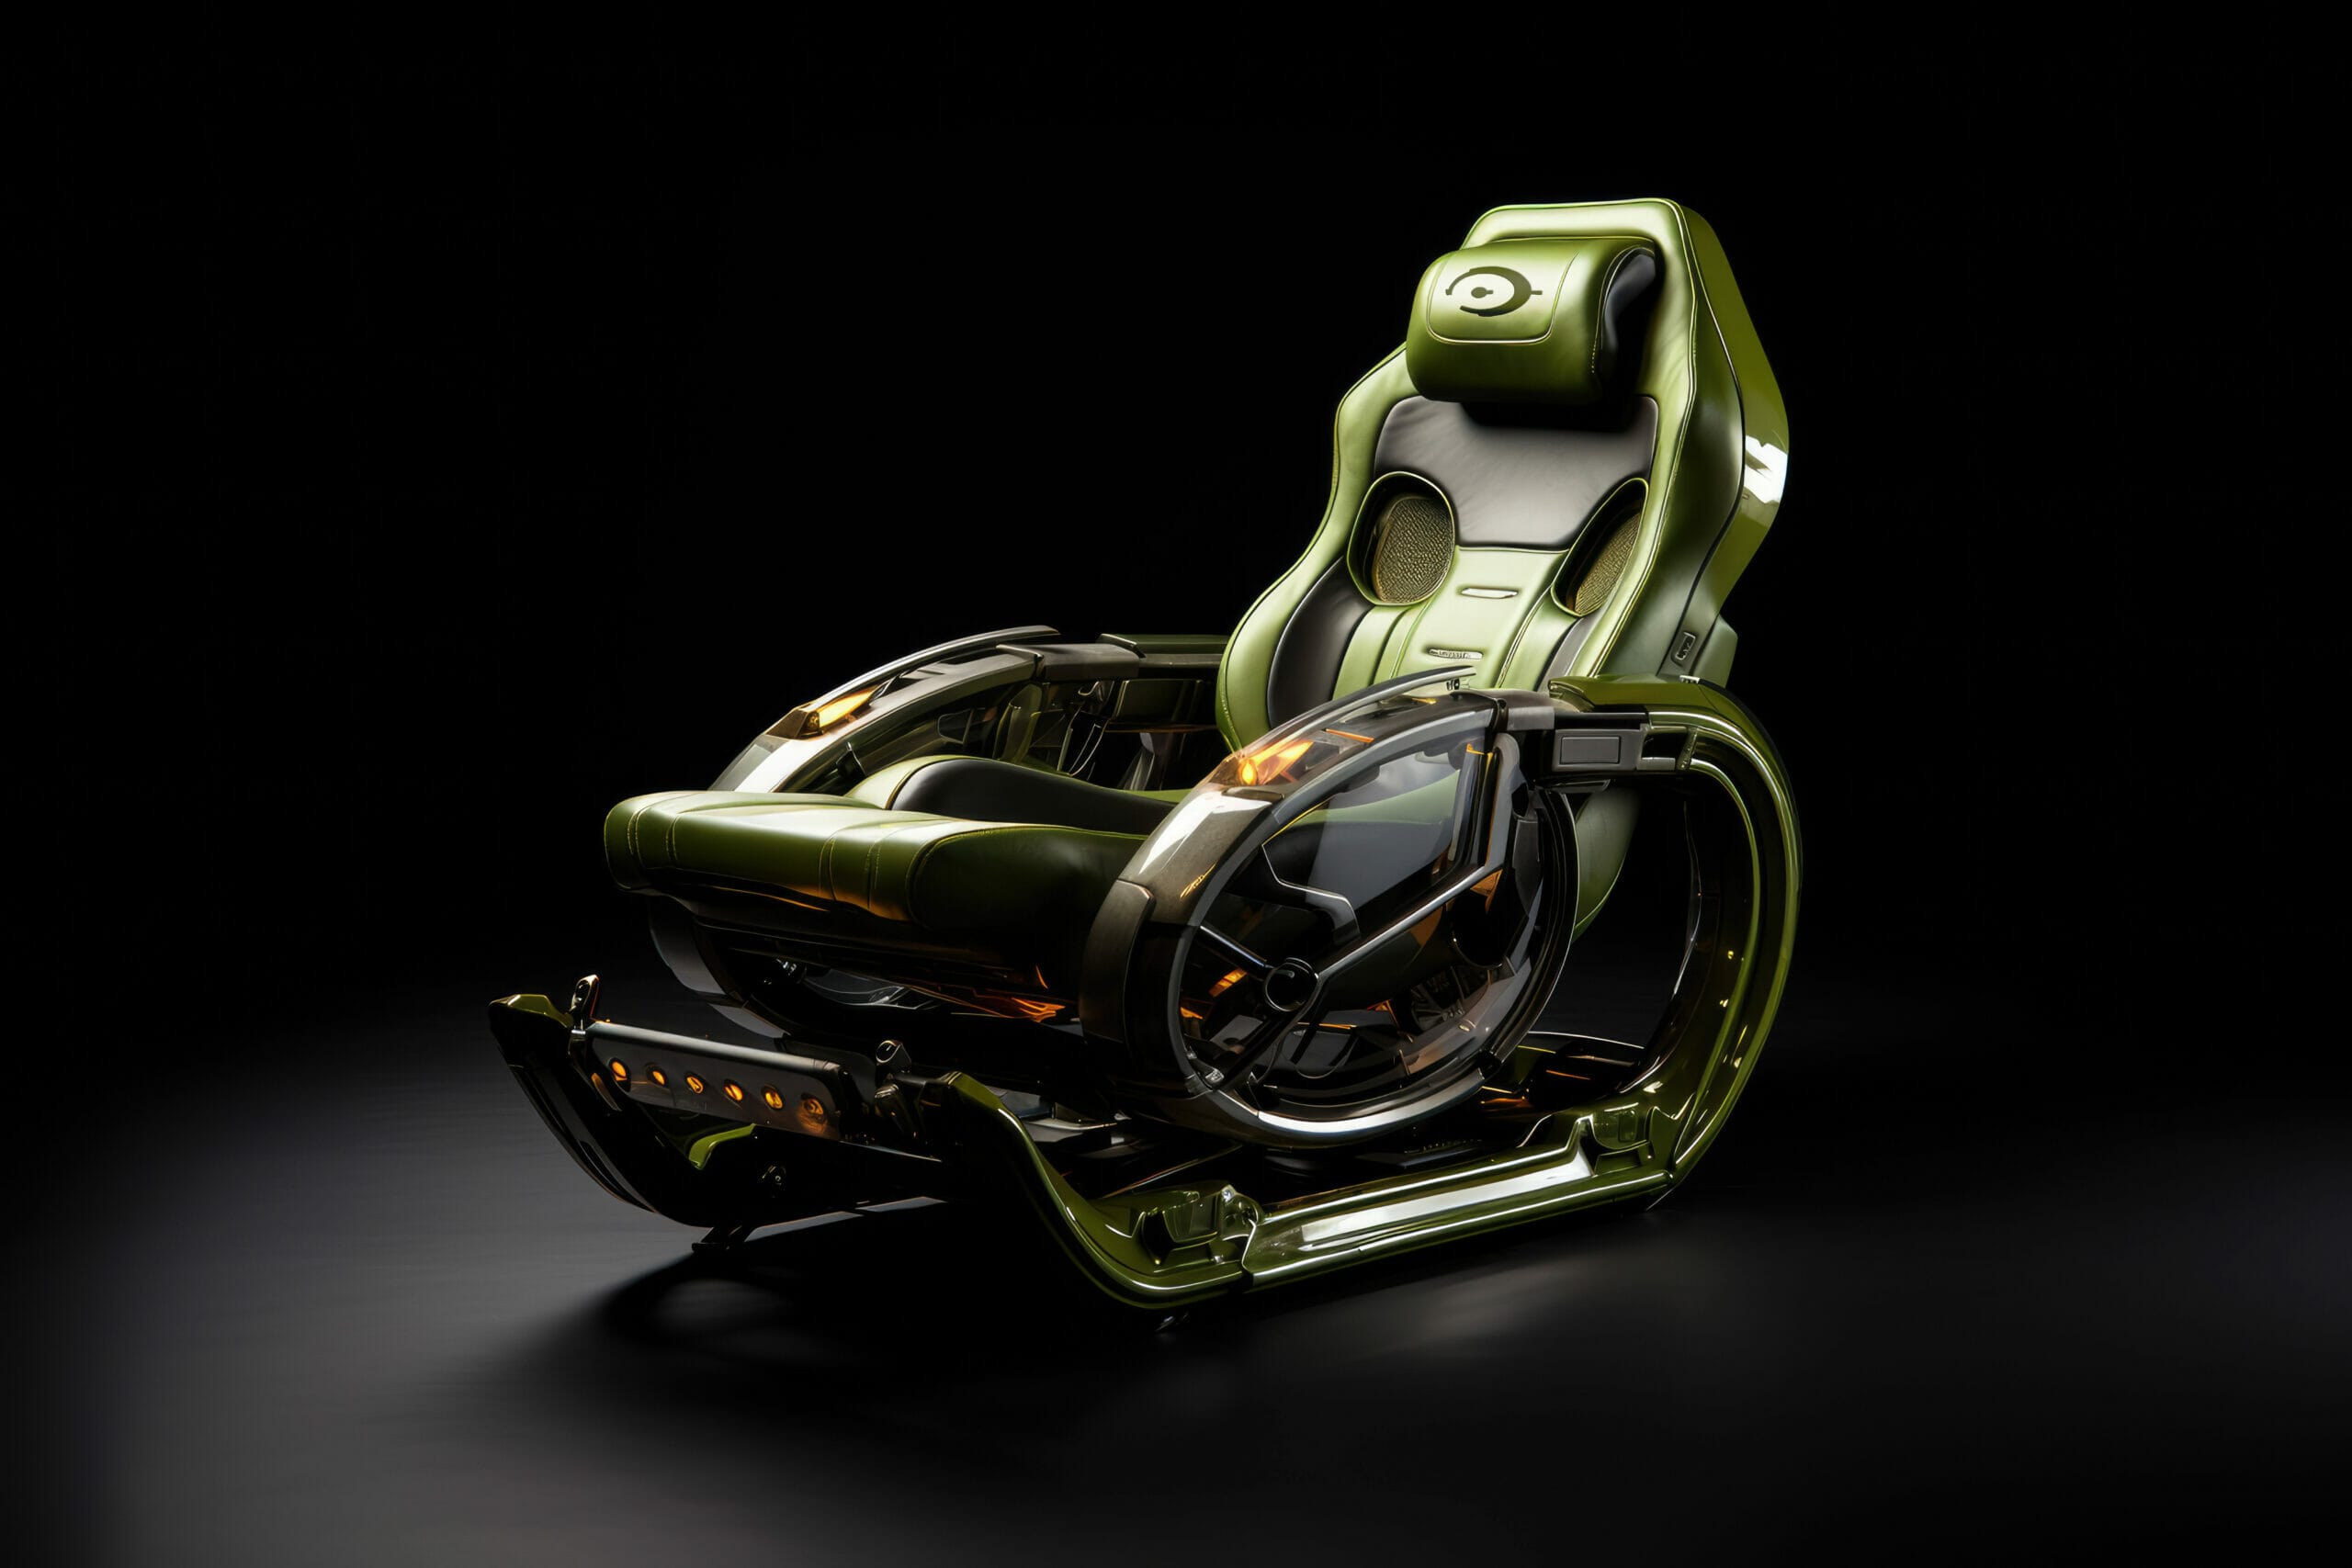 Halo inspired gaming chair